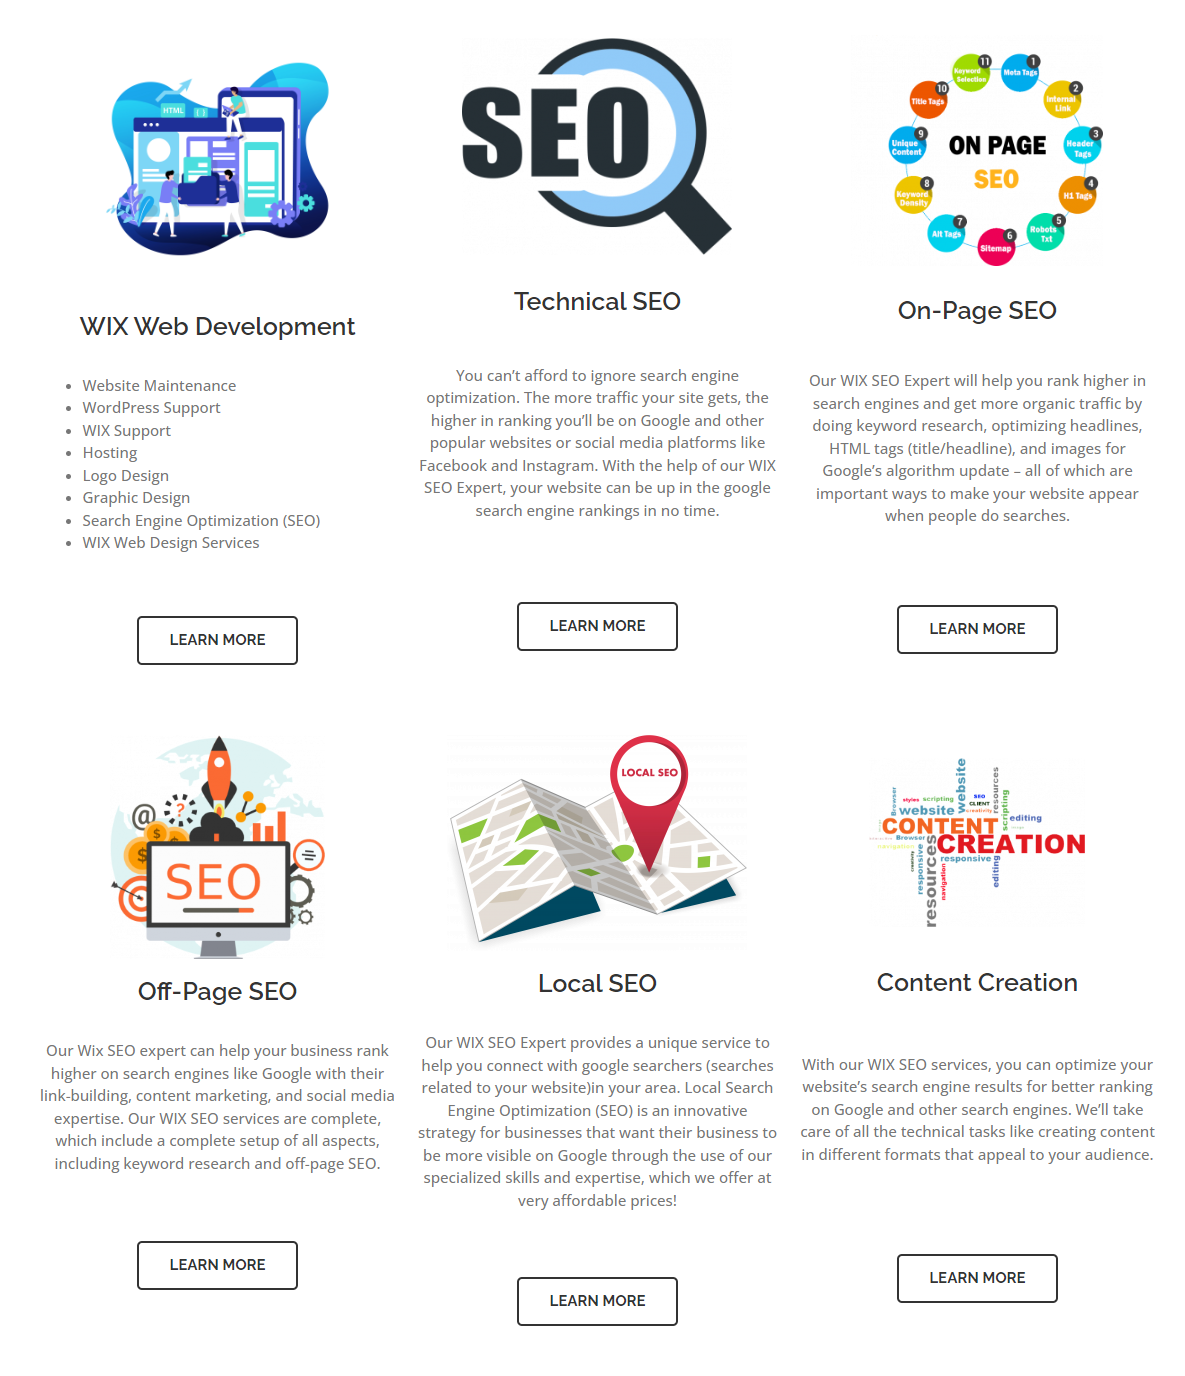 Why Do You Need to Hire a Wix SEO Expert?